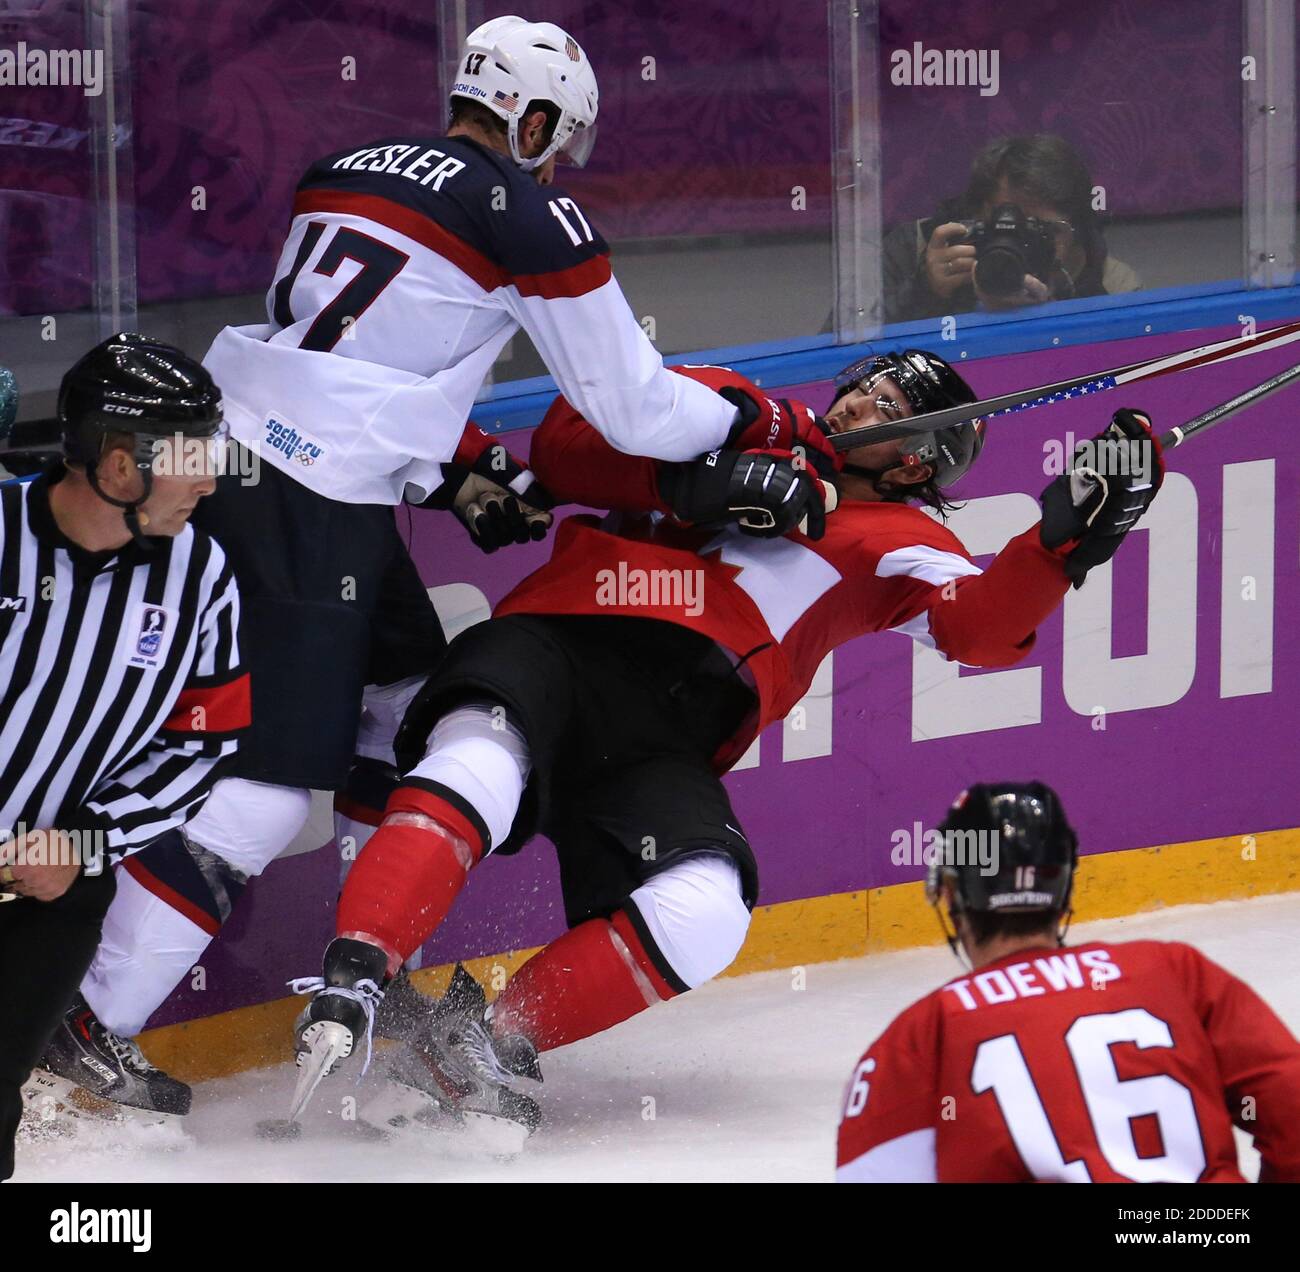 USA defenseman Anne Schleper (15) cross checks Canada forward Jayna Hefford  (16) in the second period of the women's hockey gold medal game at the  Bolshoy Ice Dome during the Winter Olympics